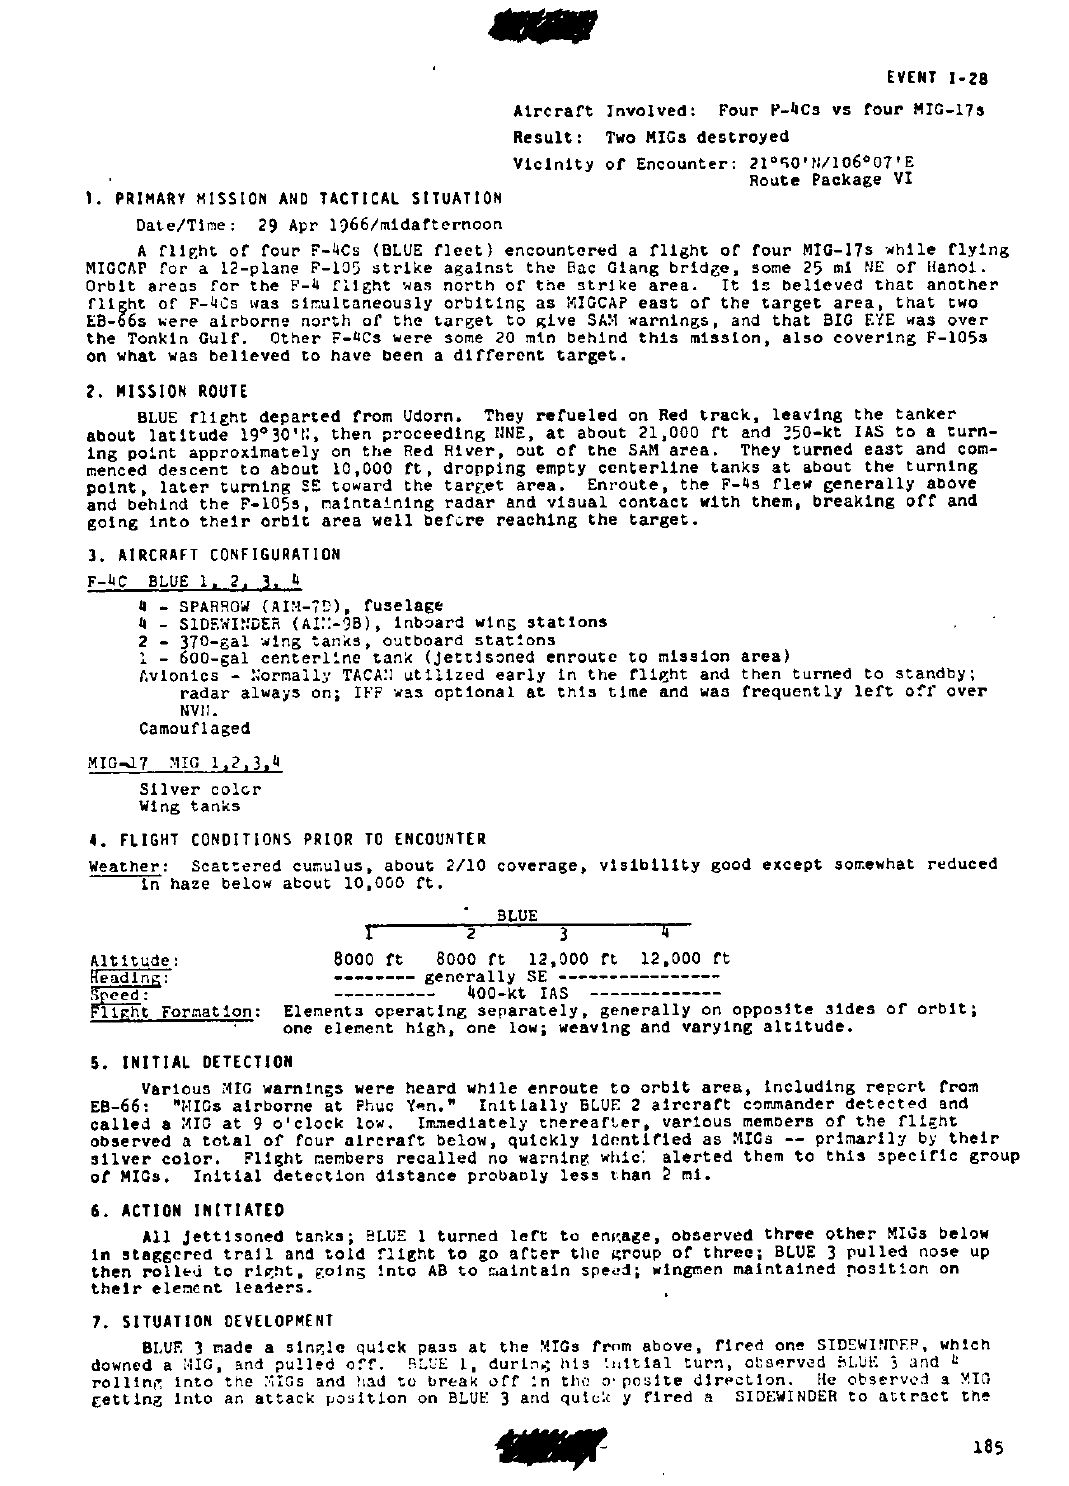 Vietnam-War-Air-to-Air-Combat-Air-Force-Reports-Page-5